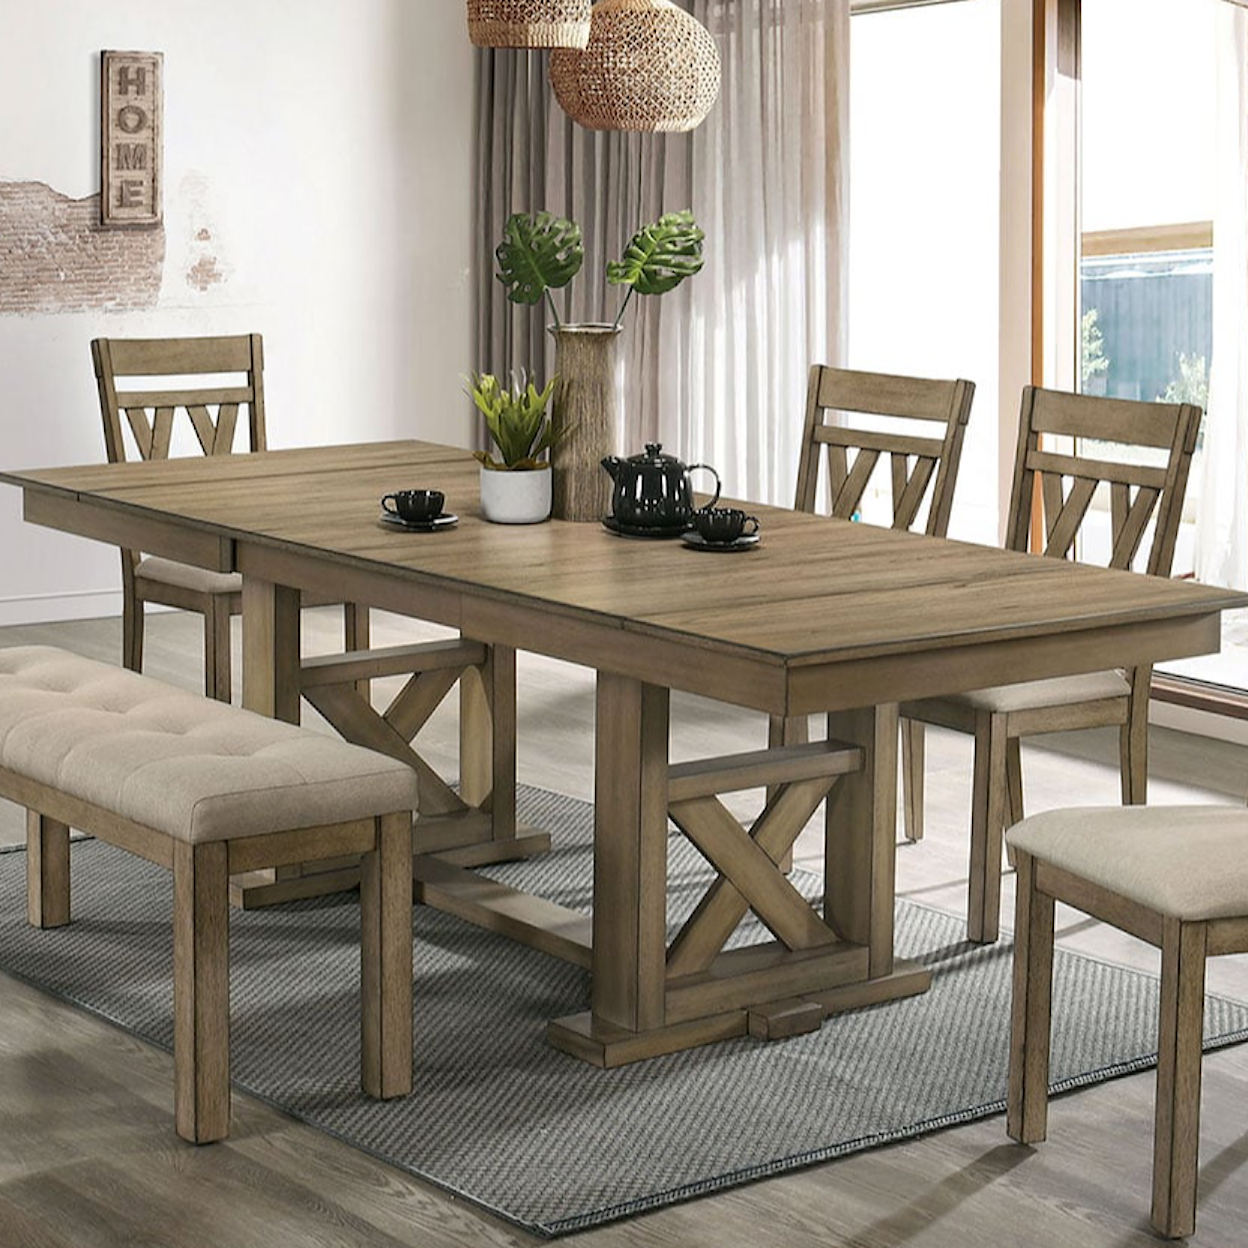 Furniture of America TEMPLEMORE Dining Table